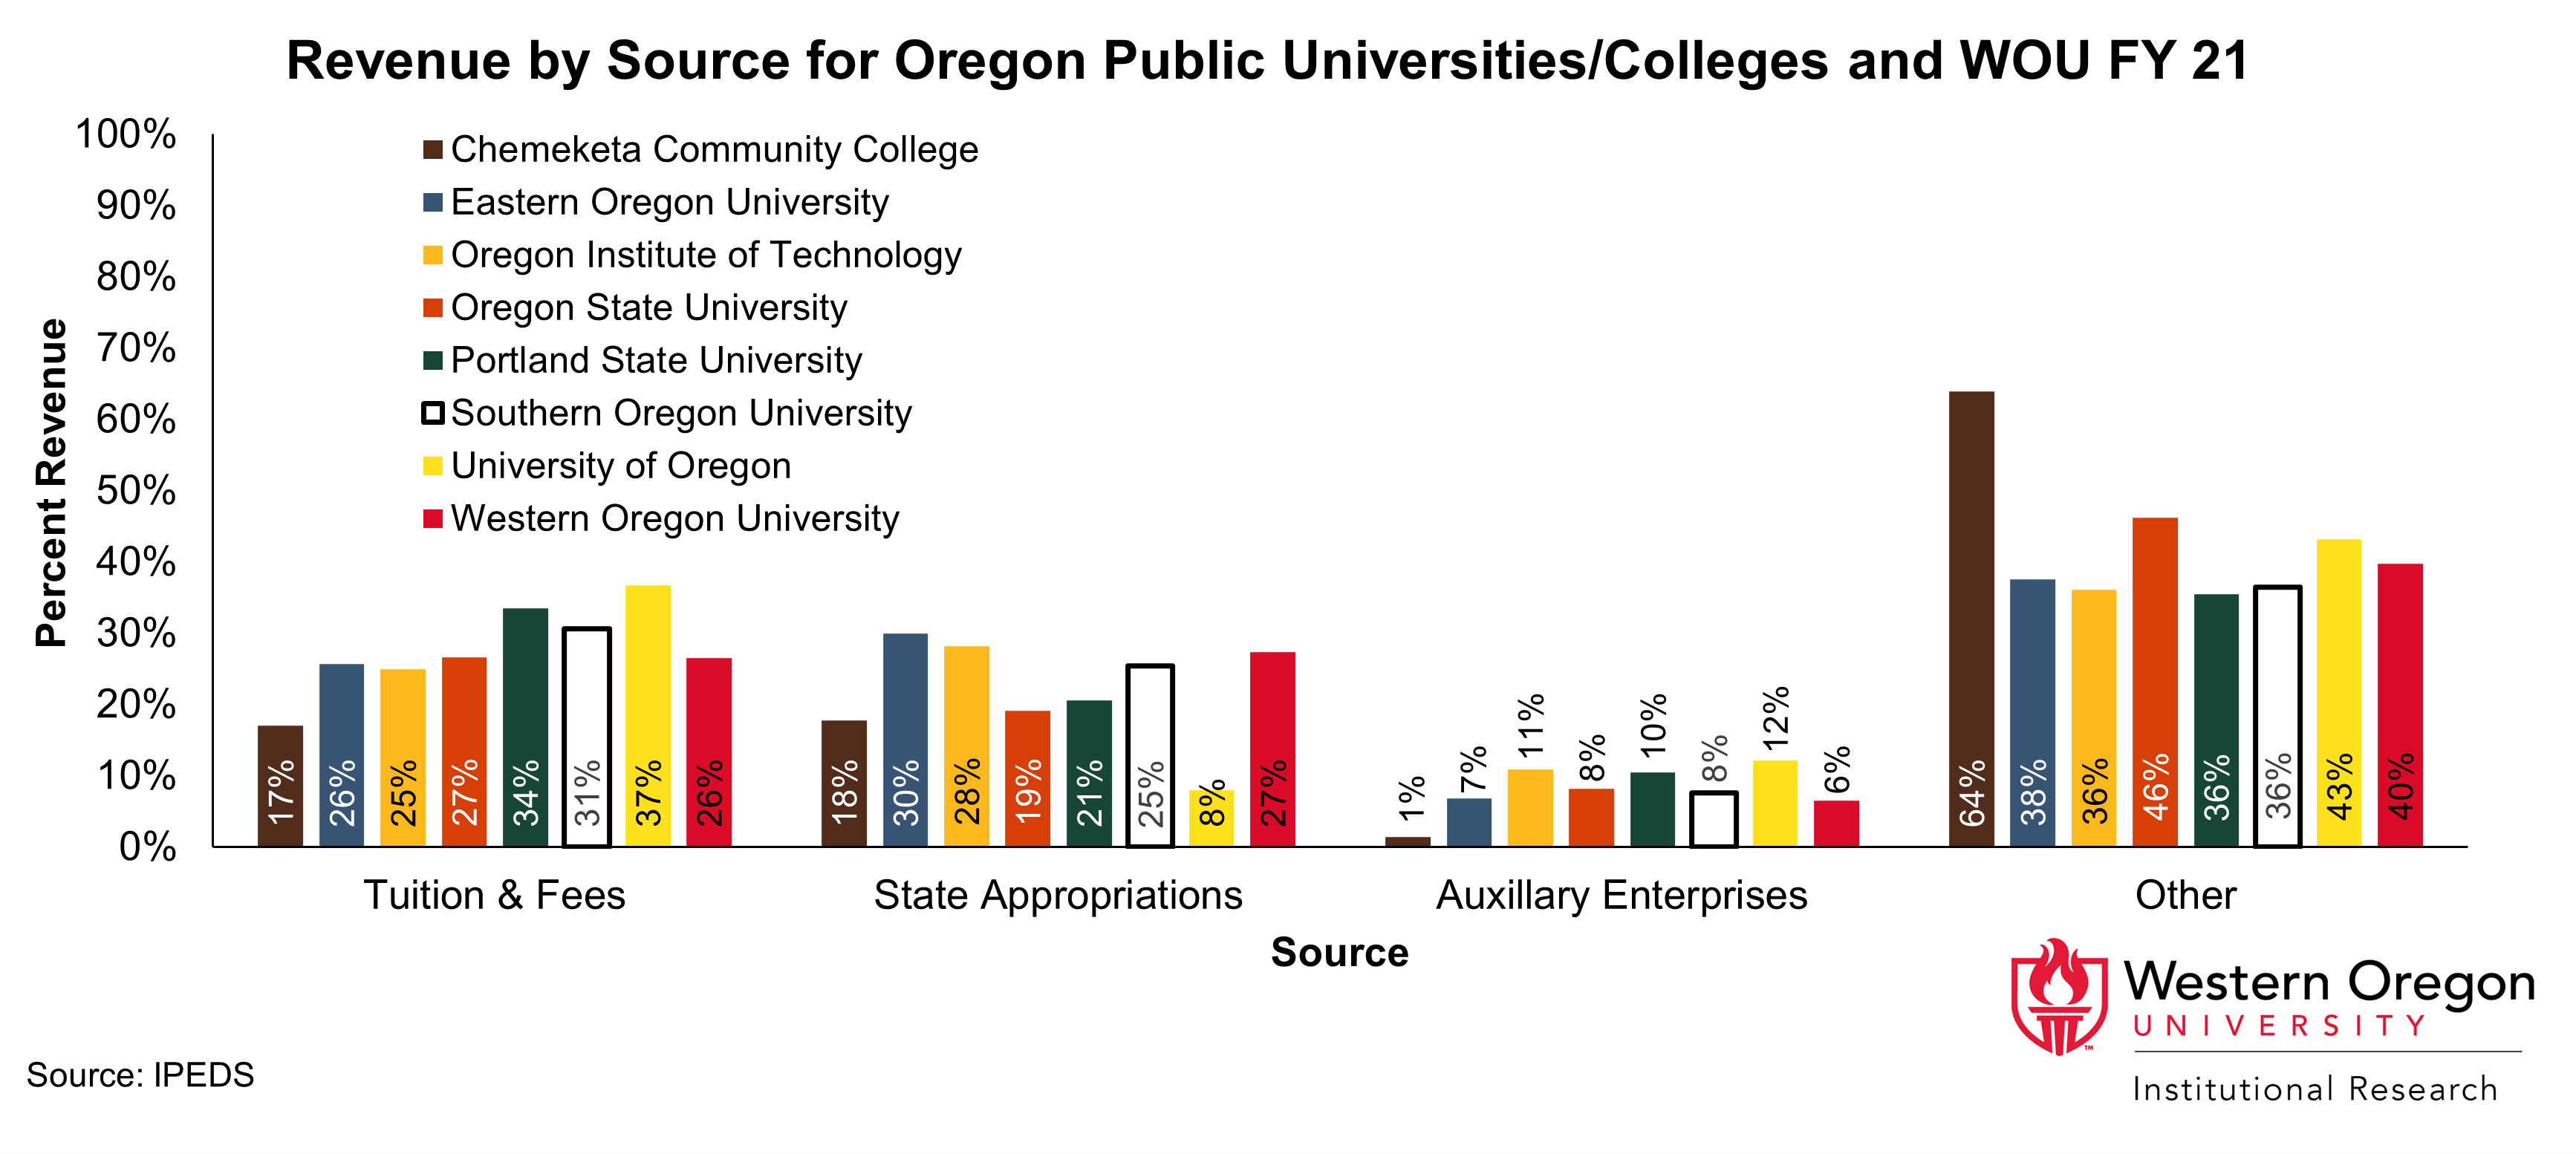 Bar graph of the sources of revenue by percentage for the Oregon Public Universities and Chemeketa Community College.